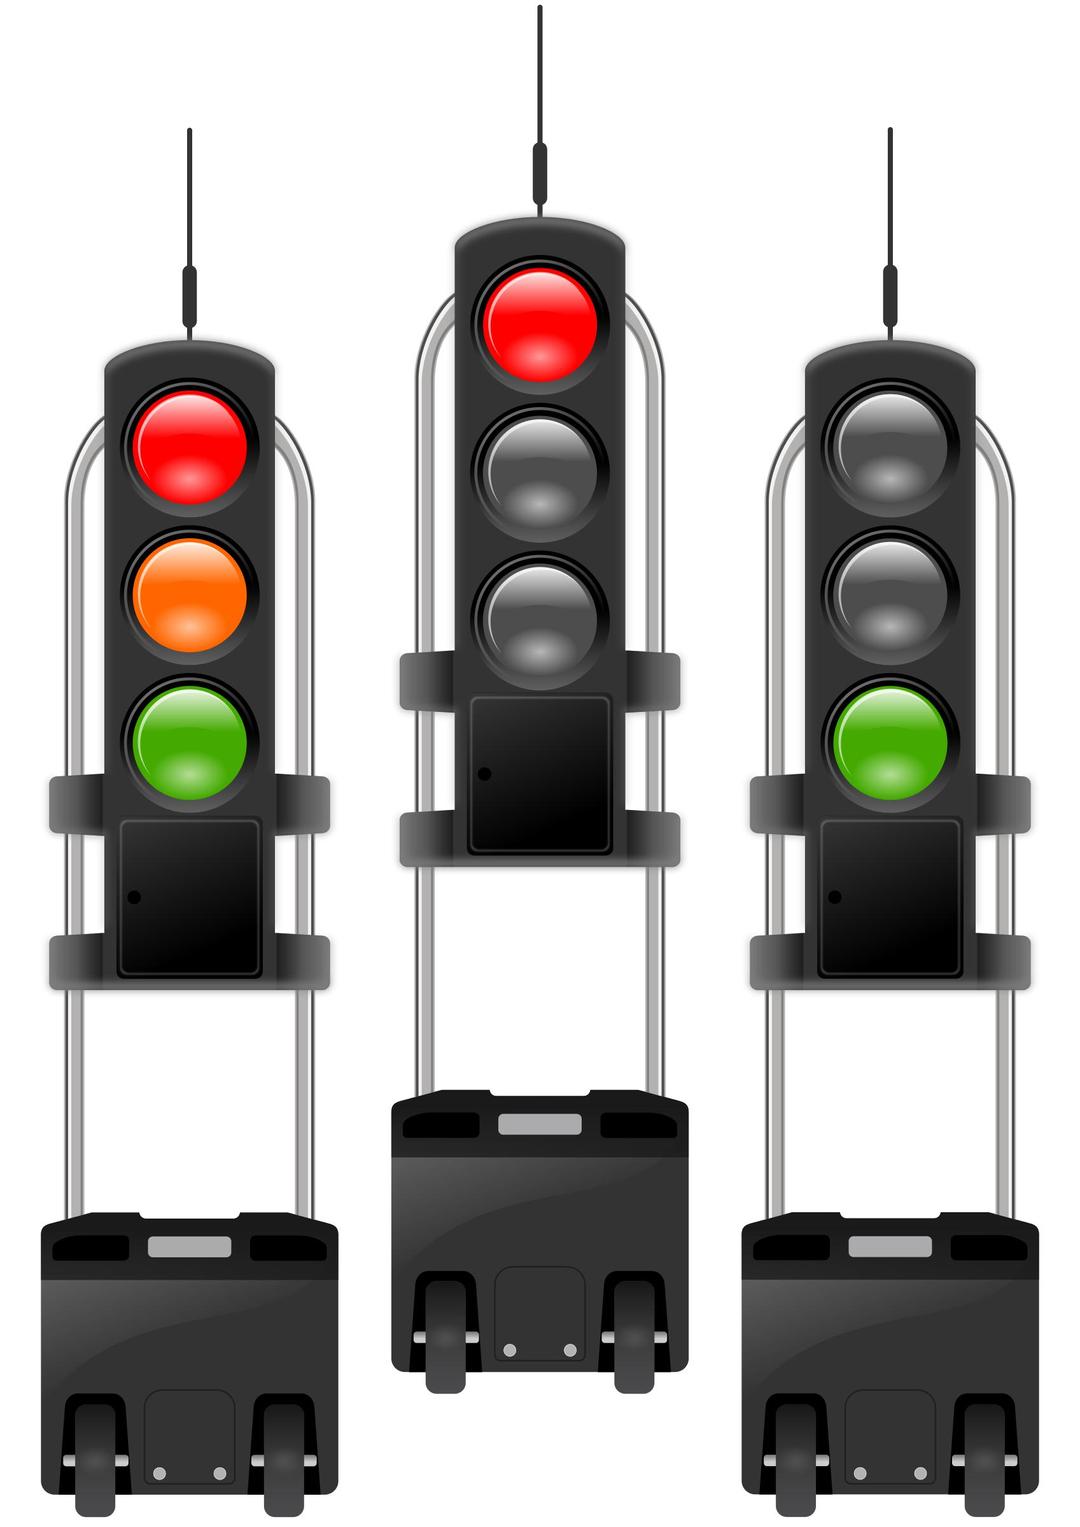 mobile traffic-lights threesome png transparent